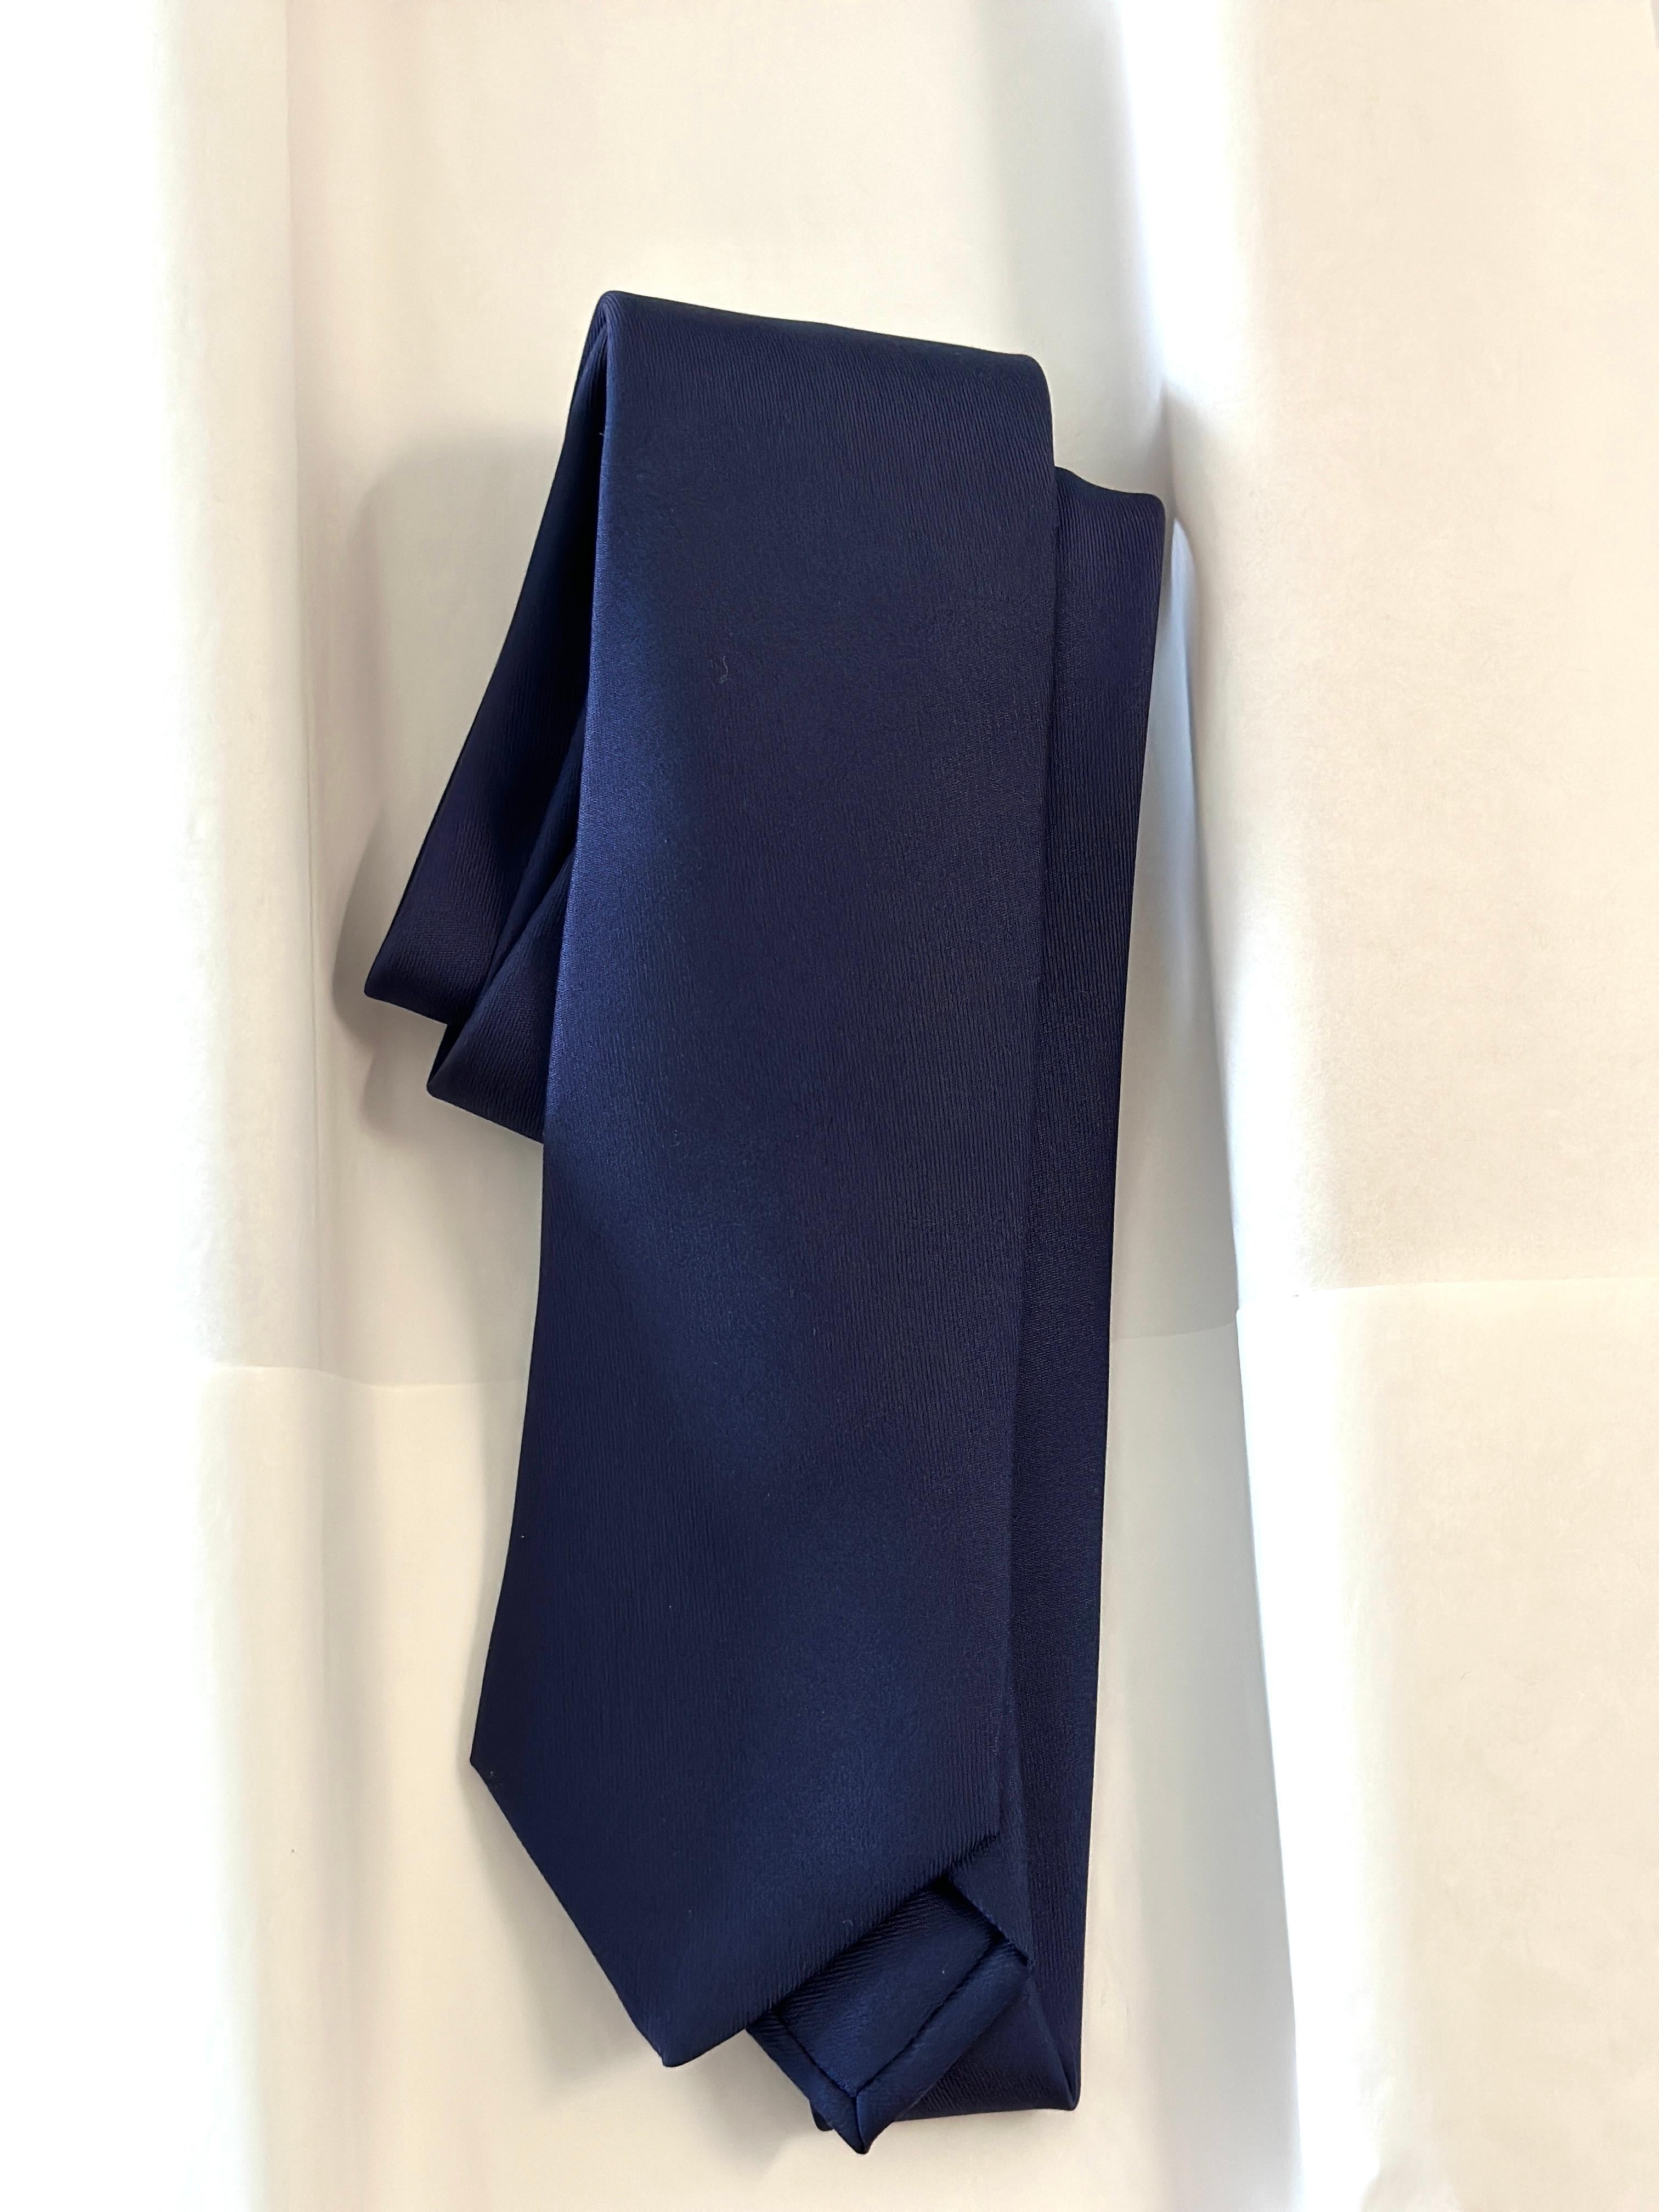 Hermes 7cm Lucky Silk Tie
This is not your dads tie! Perfect for todays man.
Color is a dark blue Marine
100% Silk
Hard to find this exact tie
Solid with a 